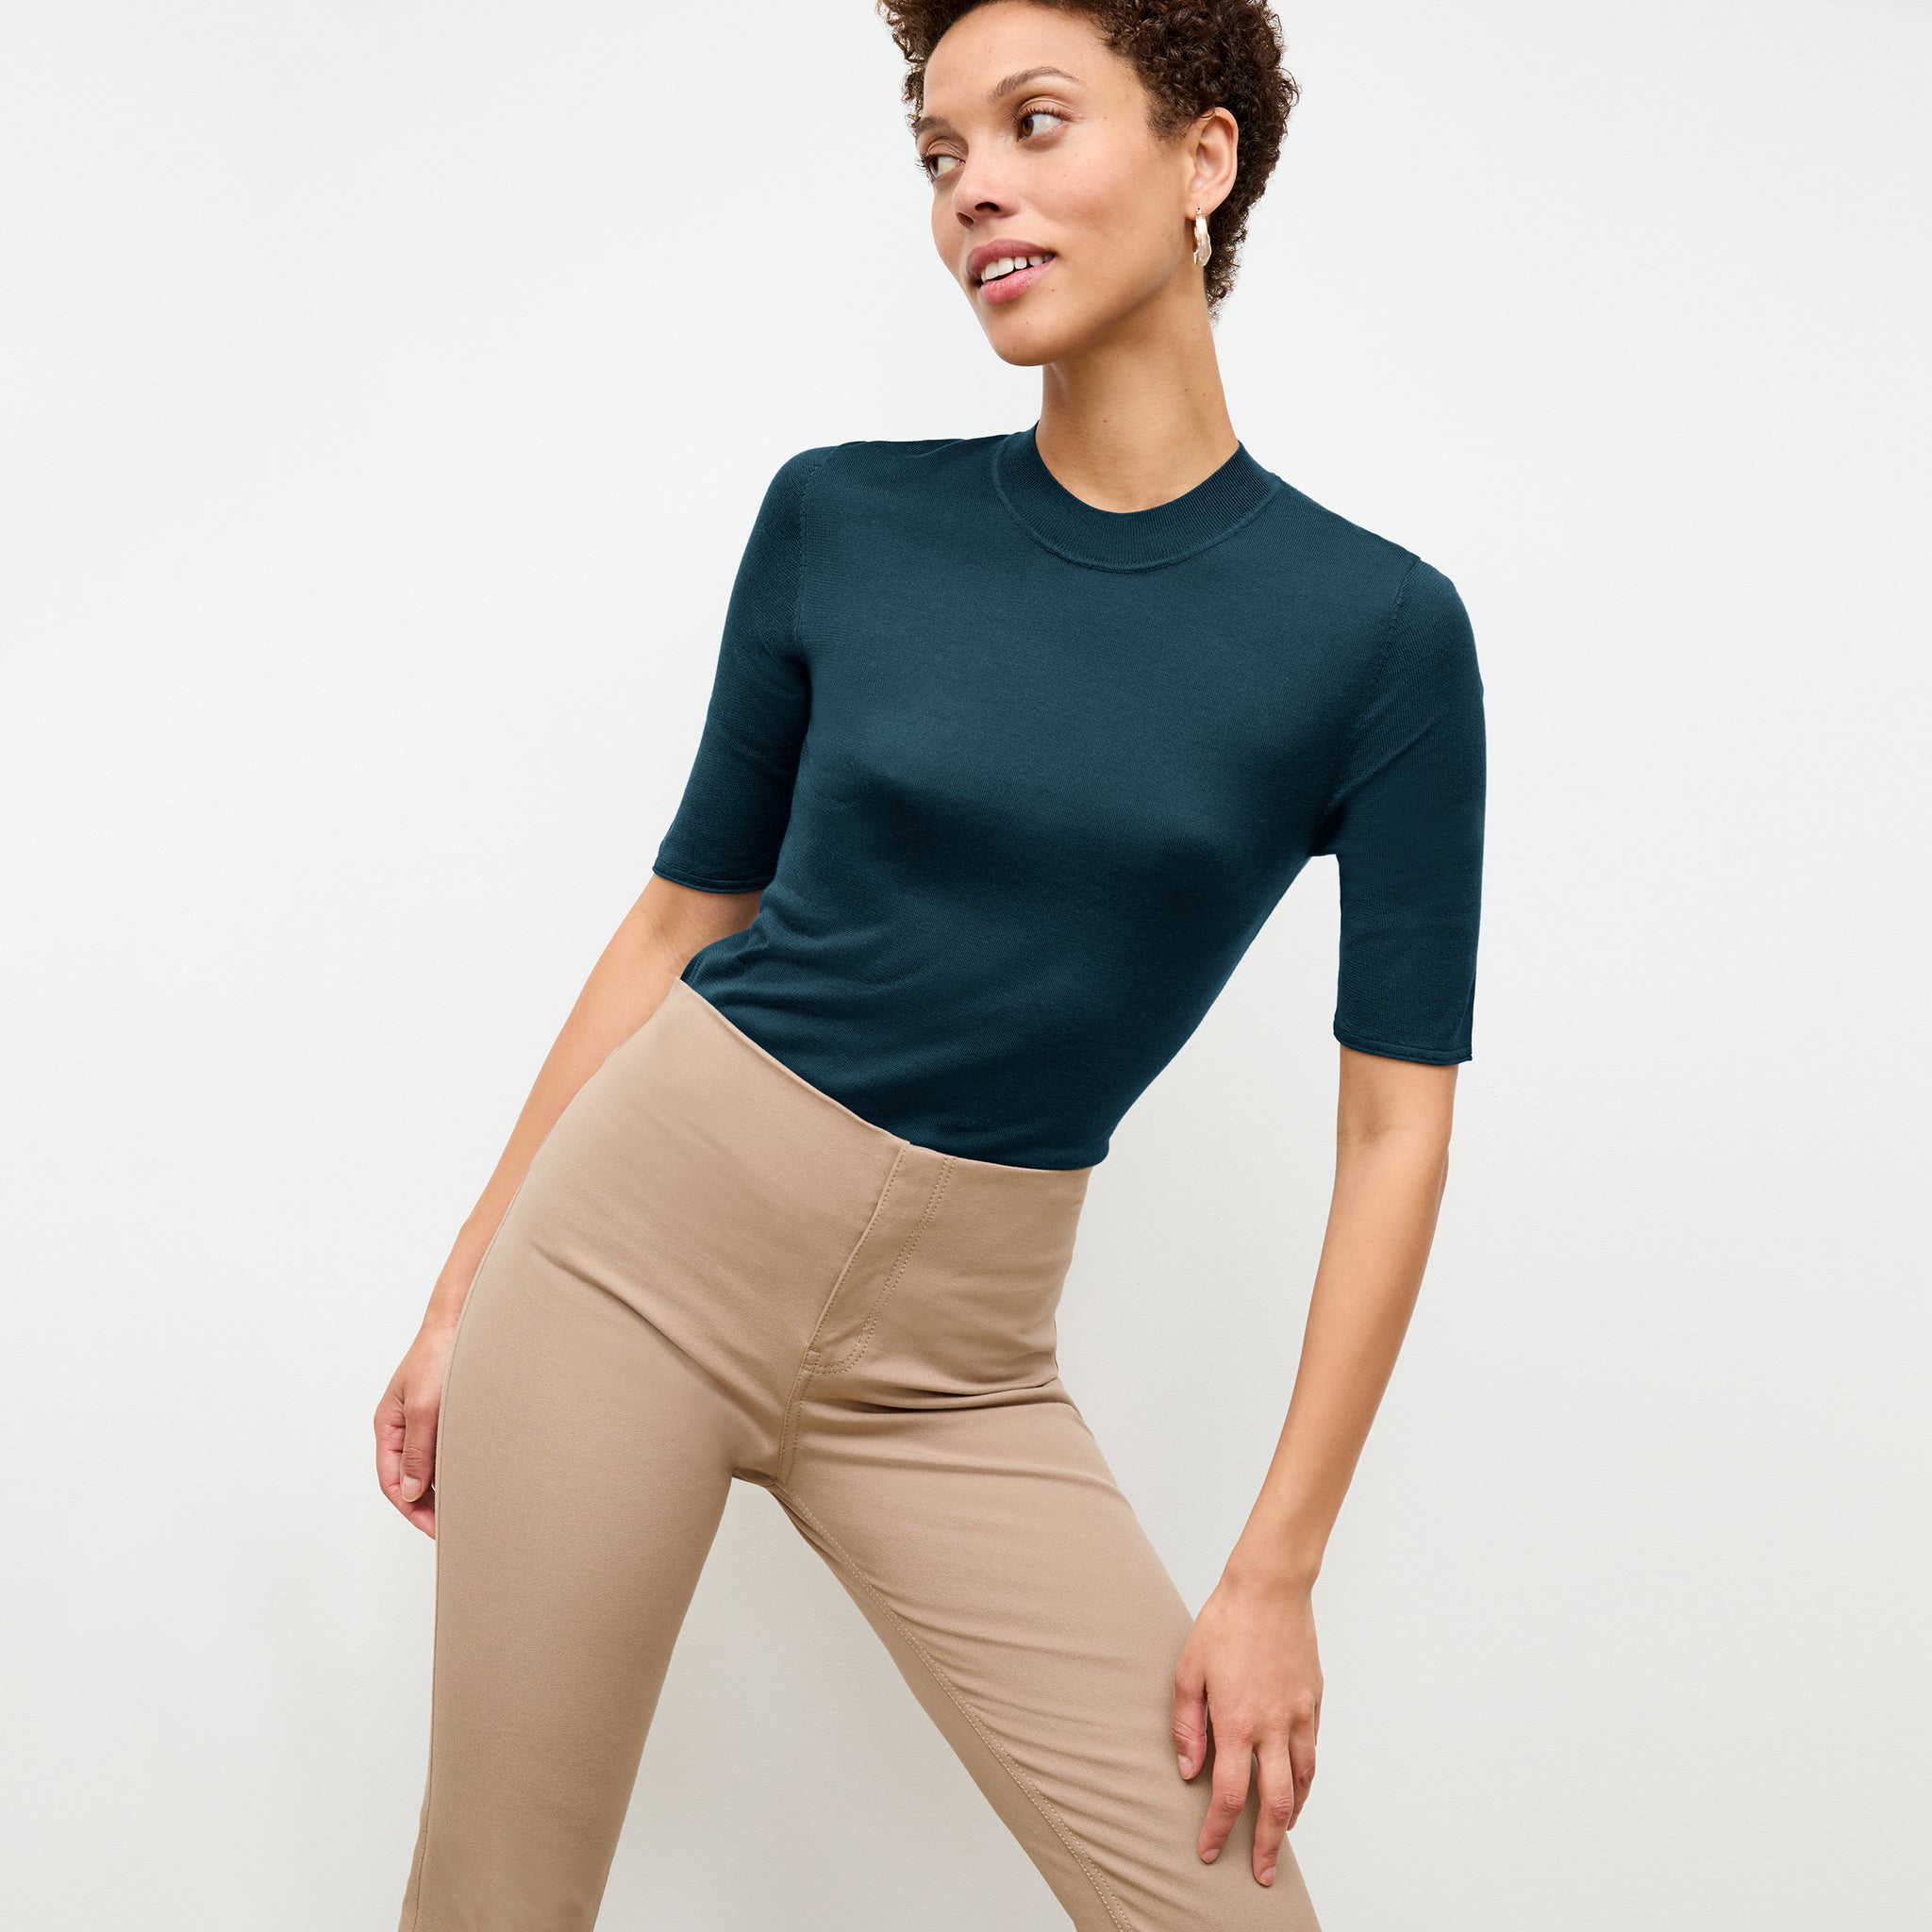 Front image of a woman wearing the Hockley Jean in Fawn